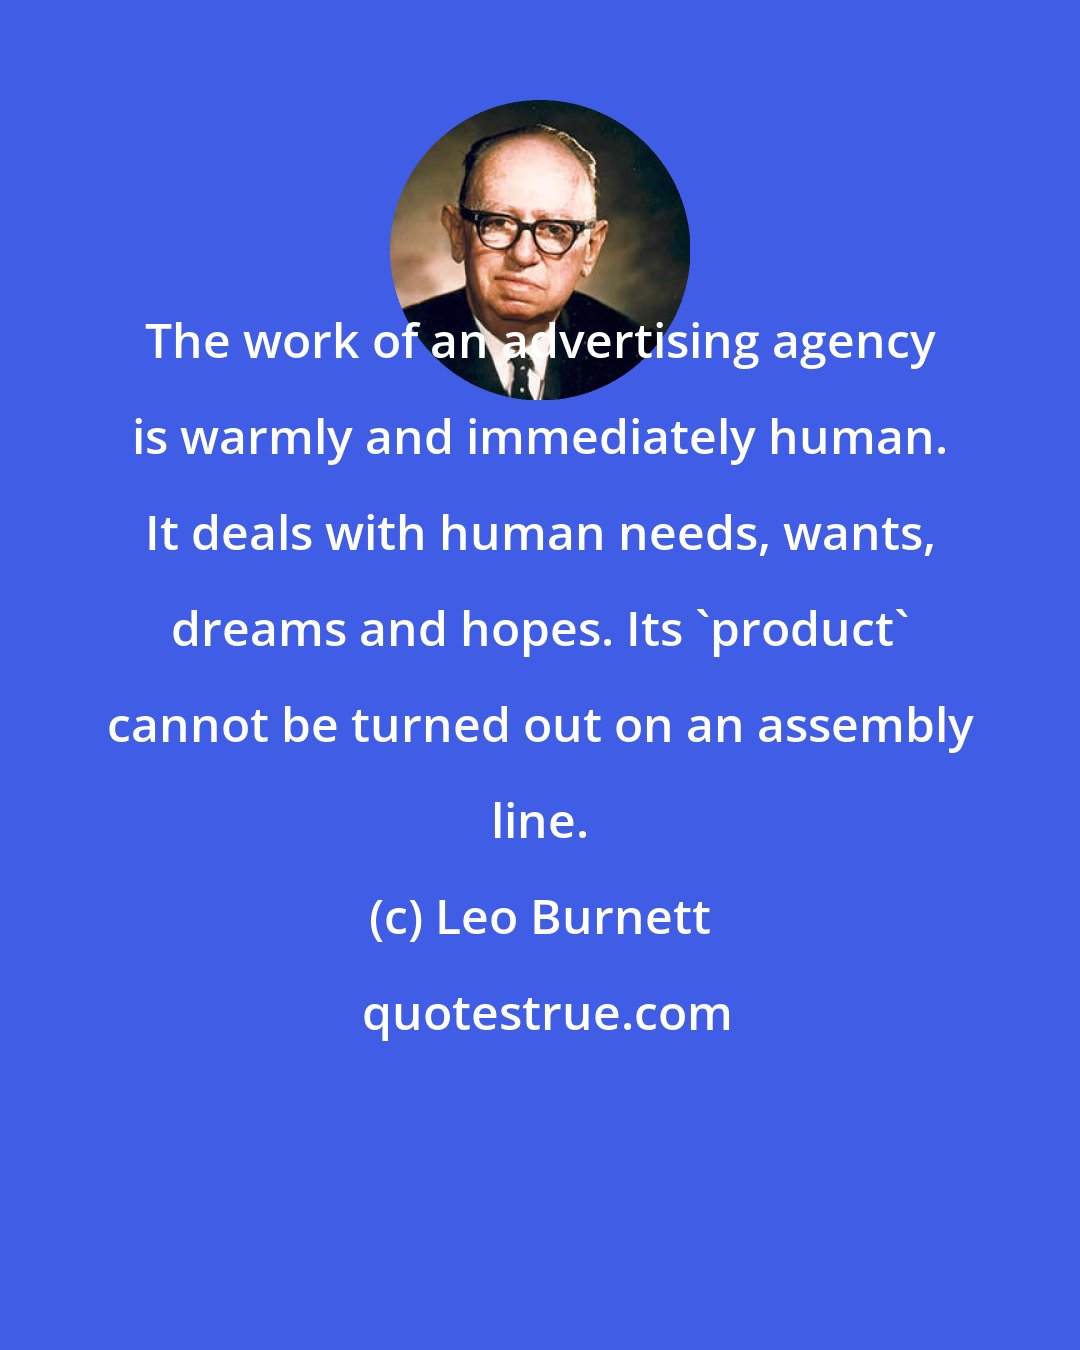 Leo Burnett: The work of an advertising agency is warmly and immediately human. It deals with human needs, wants, dreams and hopes. Its 'product' cannot be turned out on an assembly line.